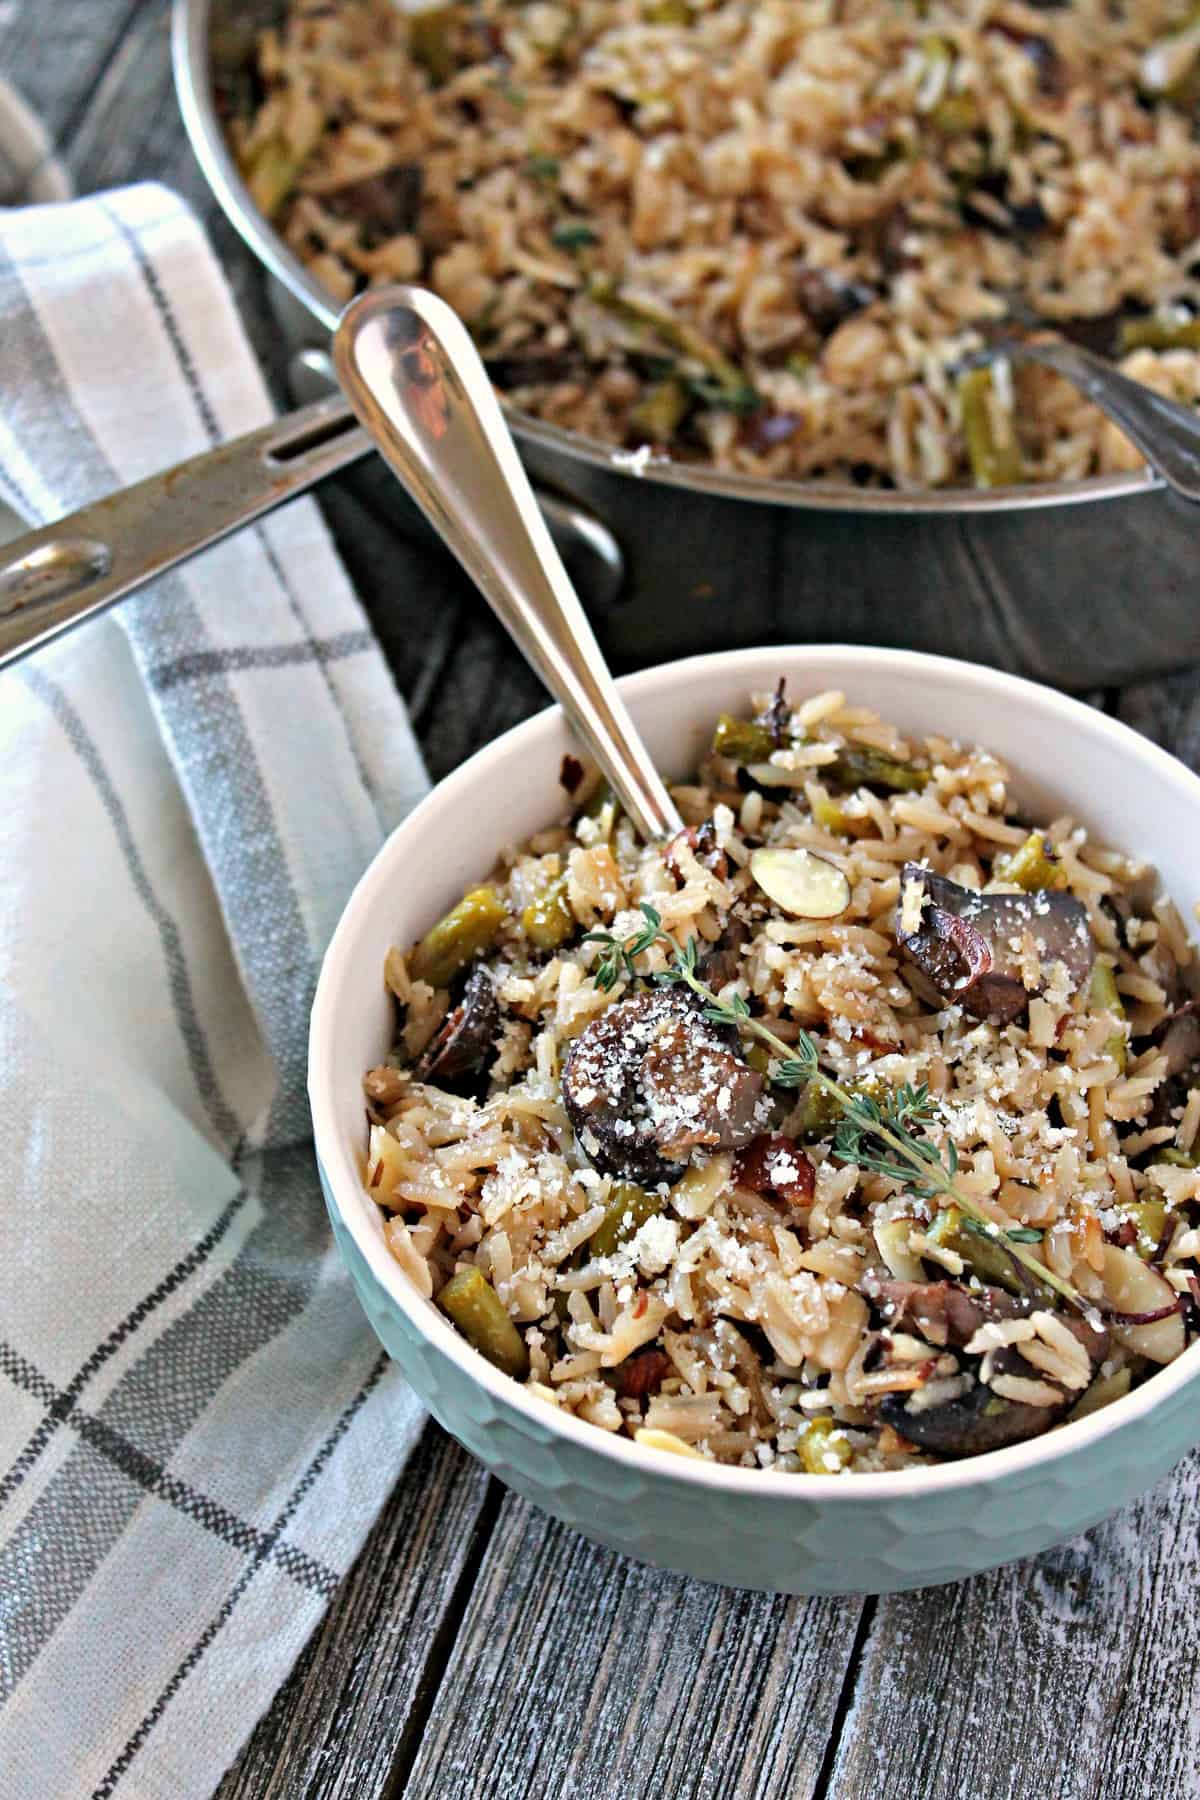 Baked Parmesan, Asparagus & Mushroom Rice Pilaf. This savory side dish starts on the stove top, then bakes to perfection in the oven, resulting in perfect rice every time. A great complement to spring meals!